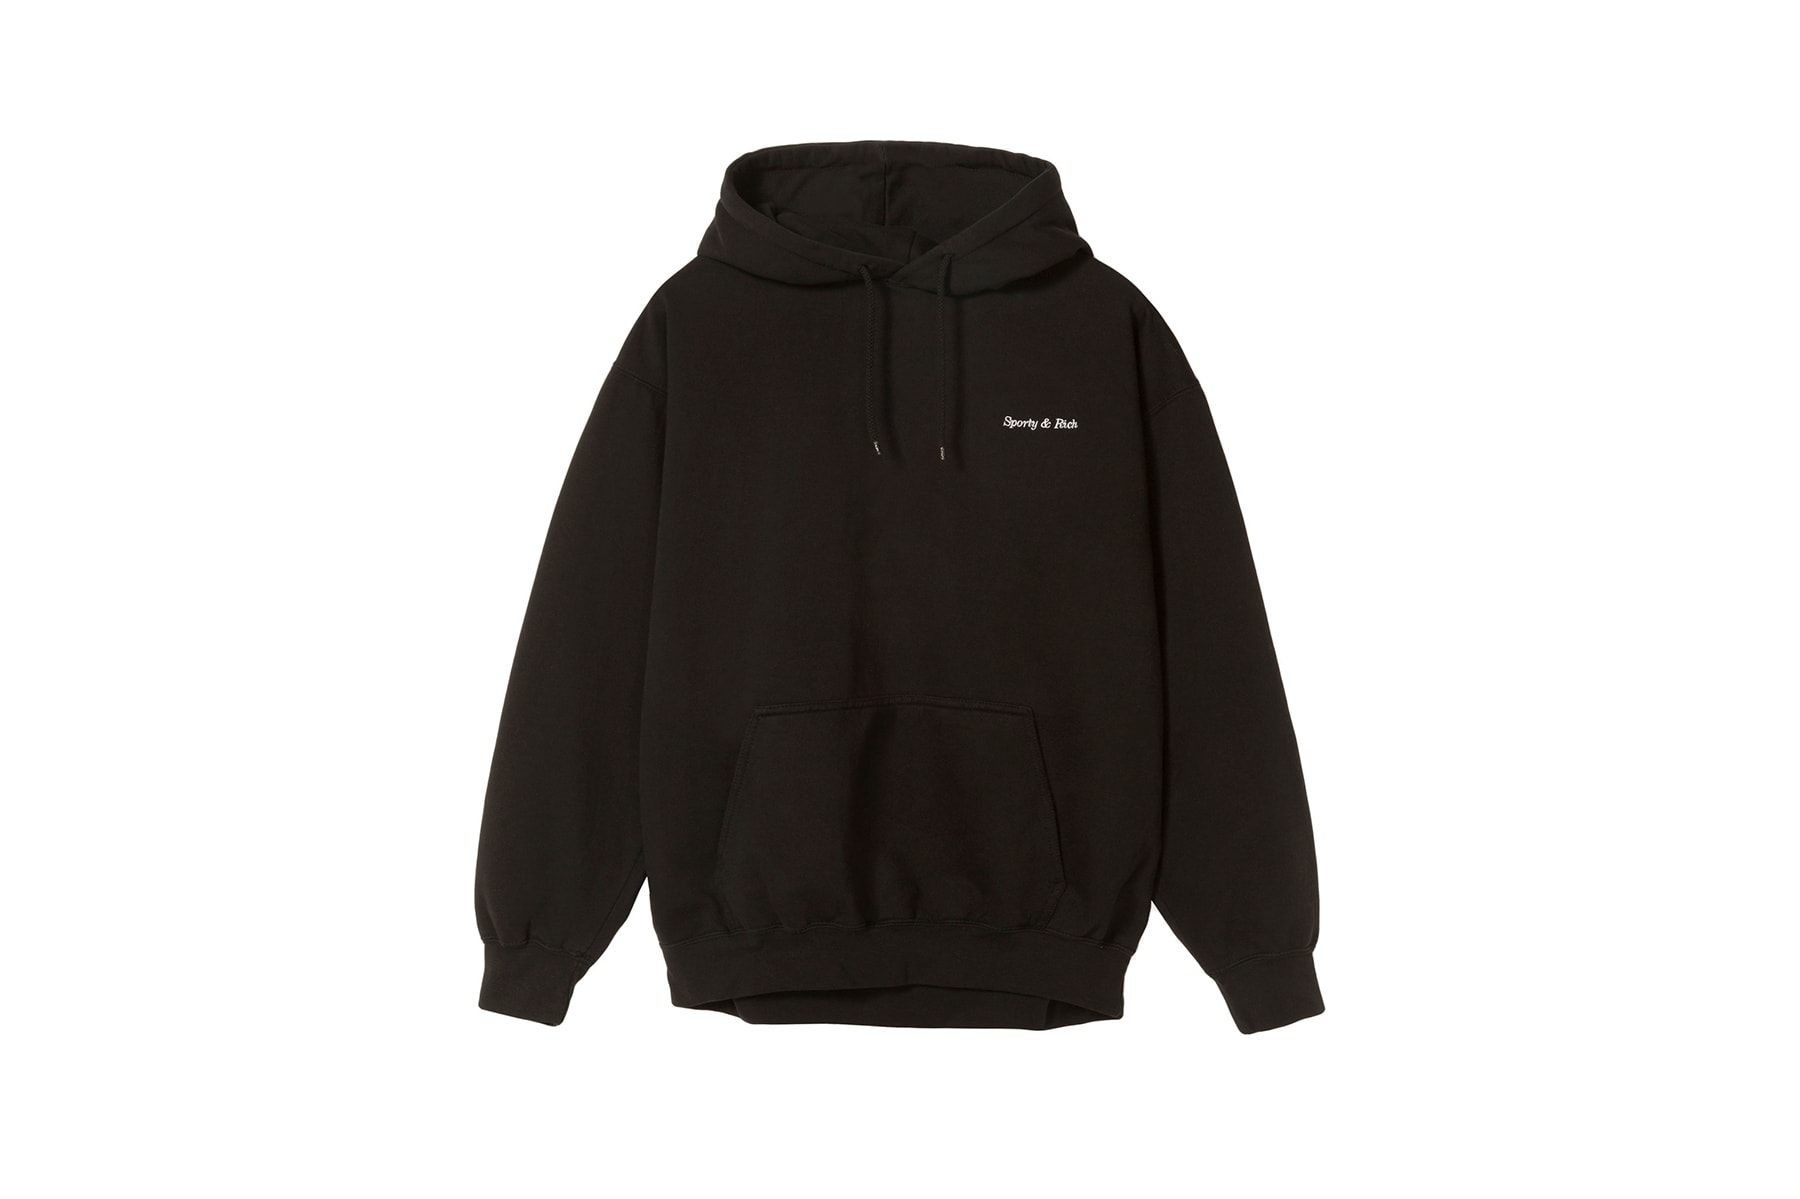 Emily Oberg Sporty & Rich Classic Black Logo Hoodie restock sells out